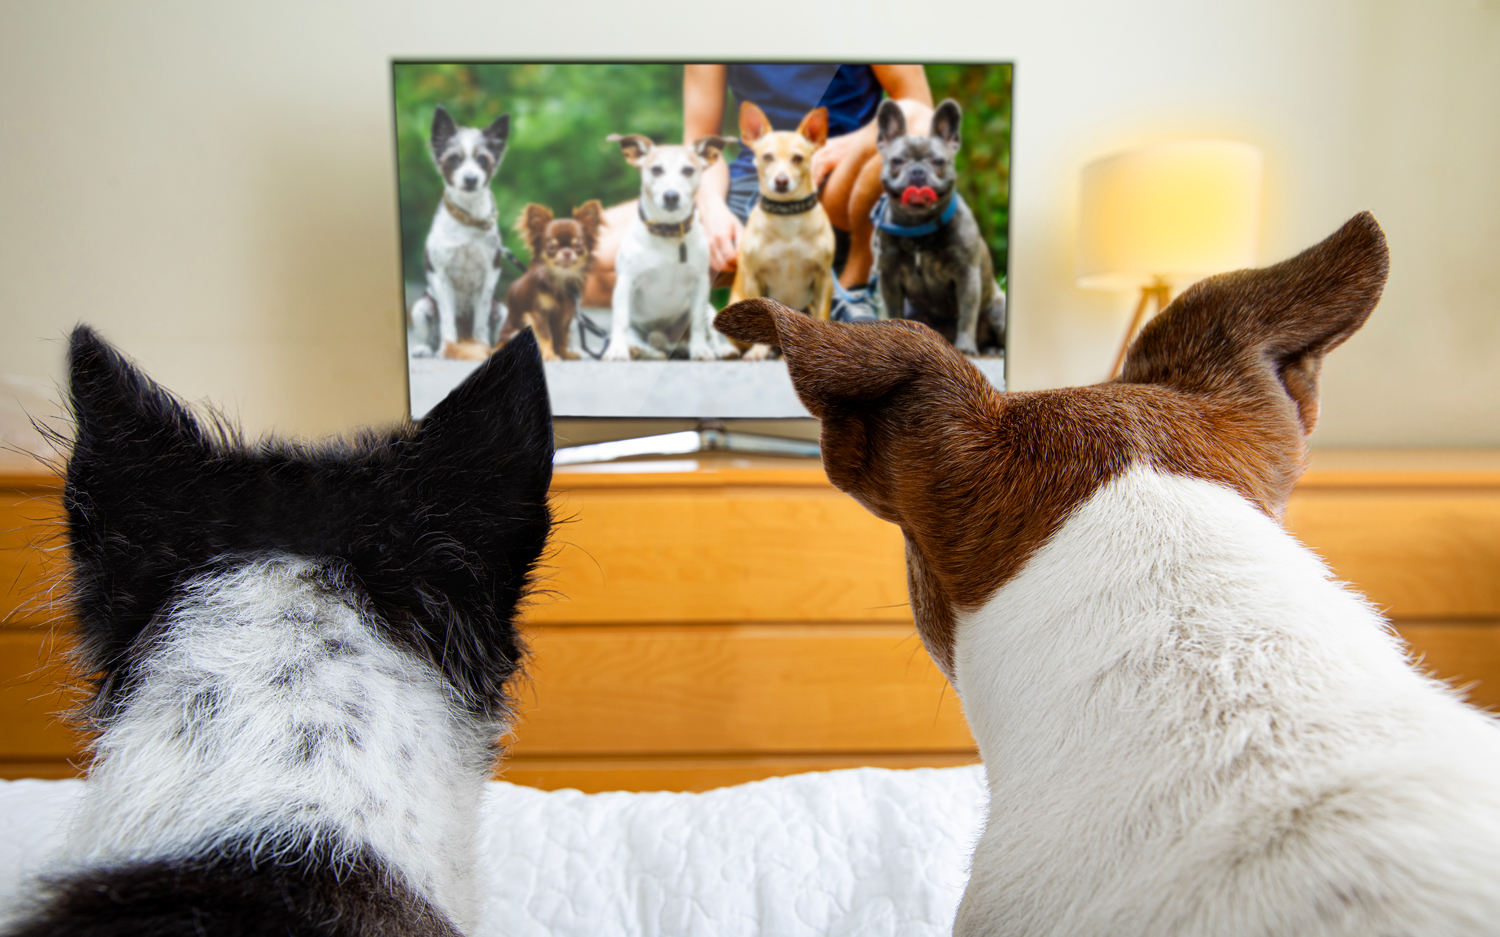 Two dogs in a living room look at a TV screen showing five seated dogs.